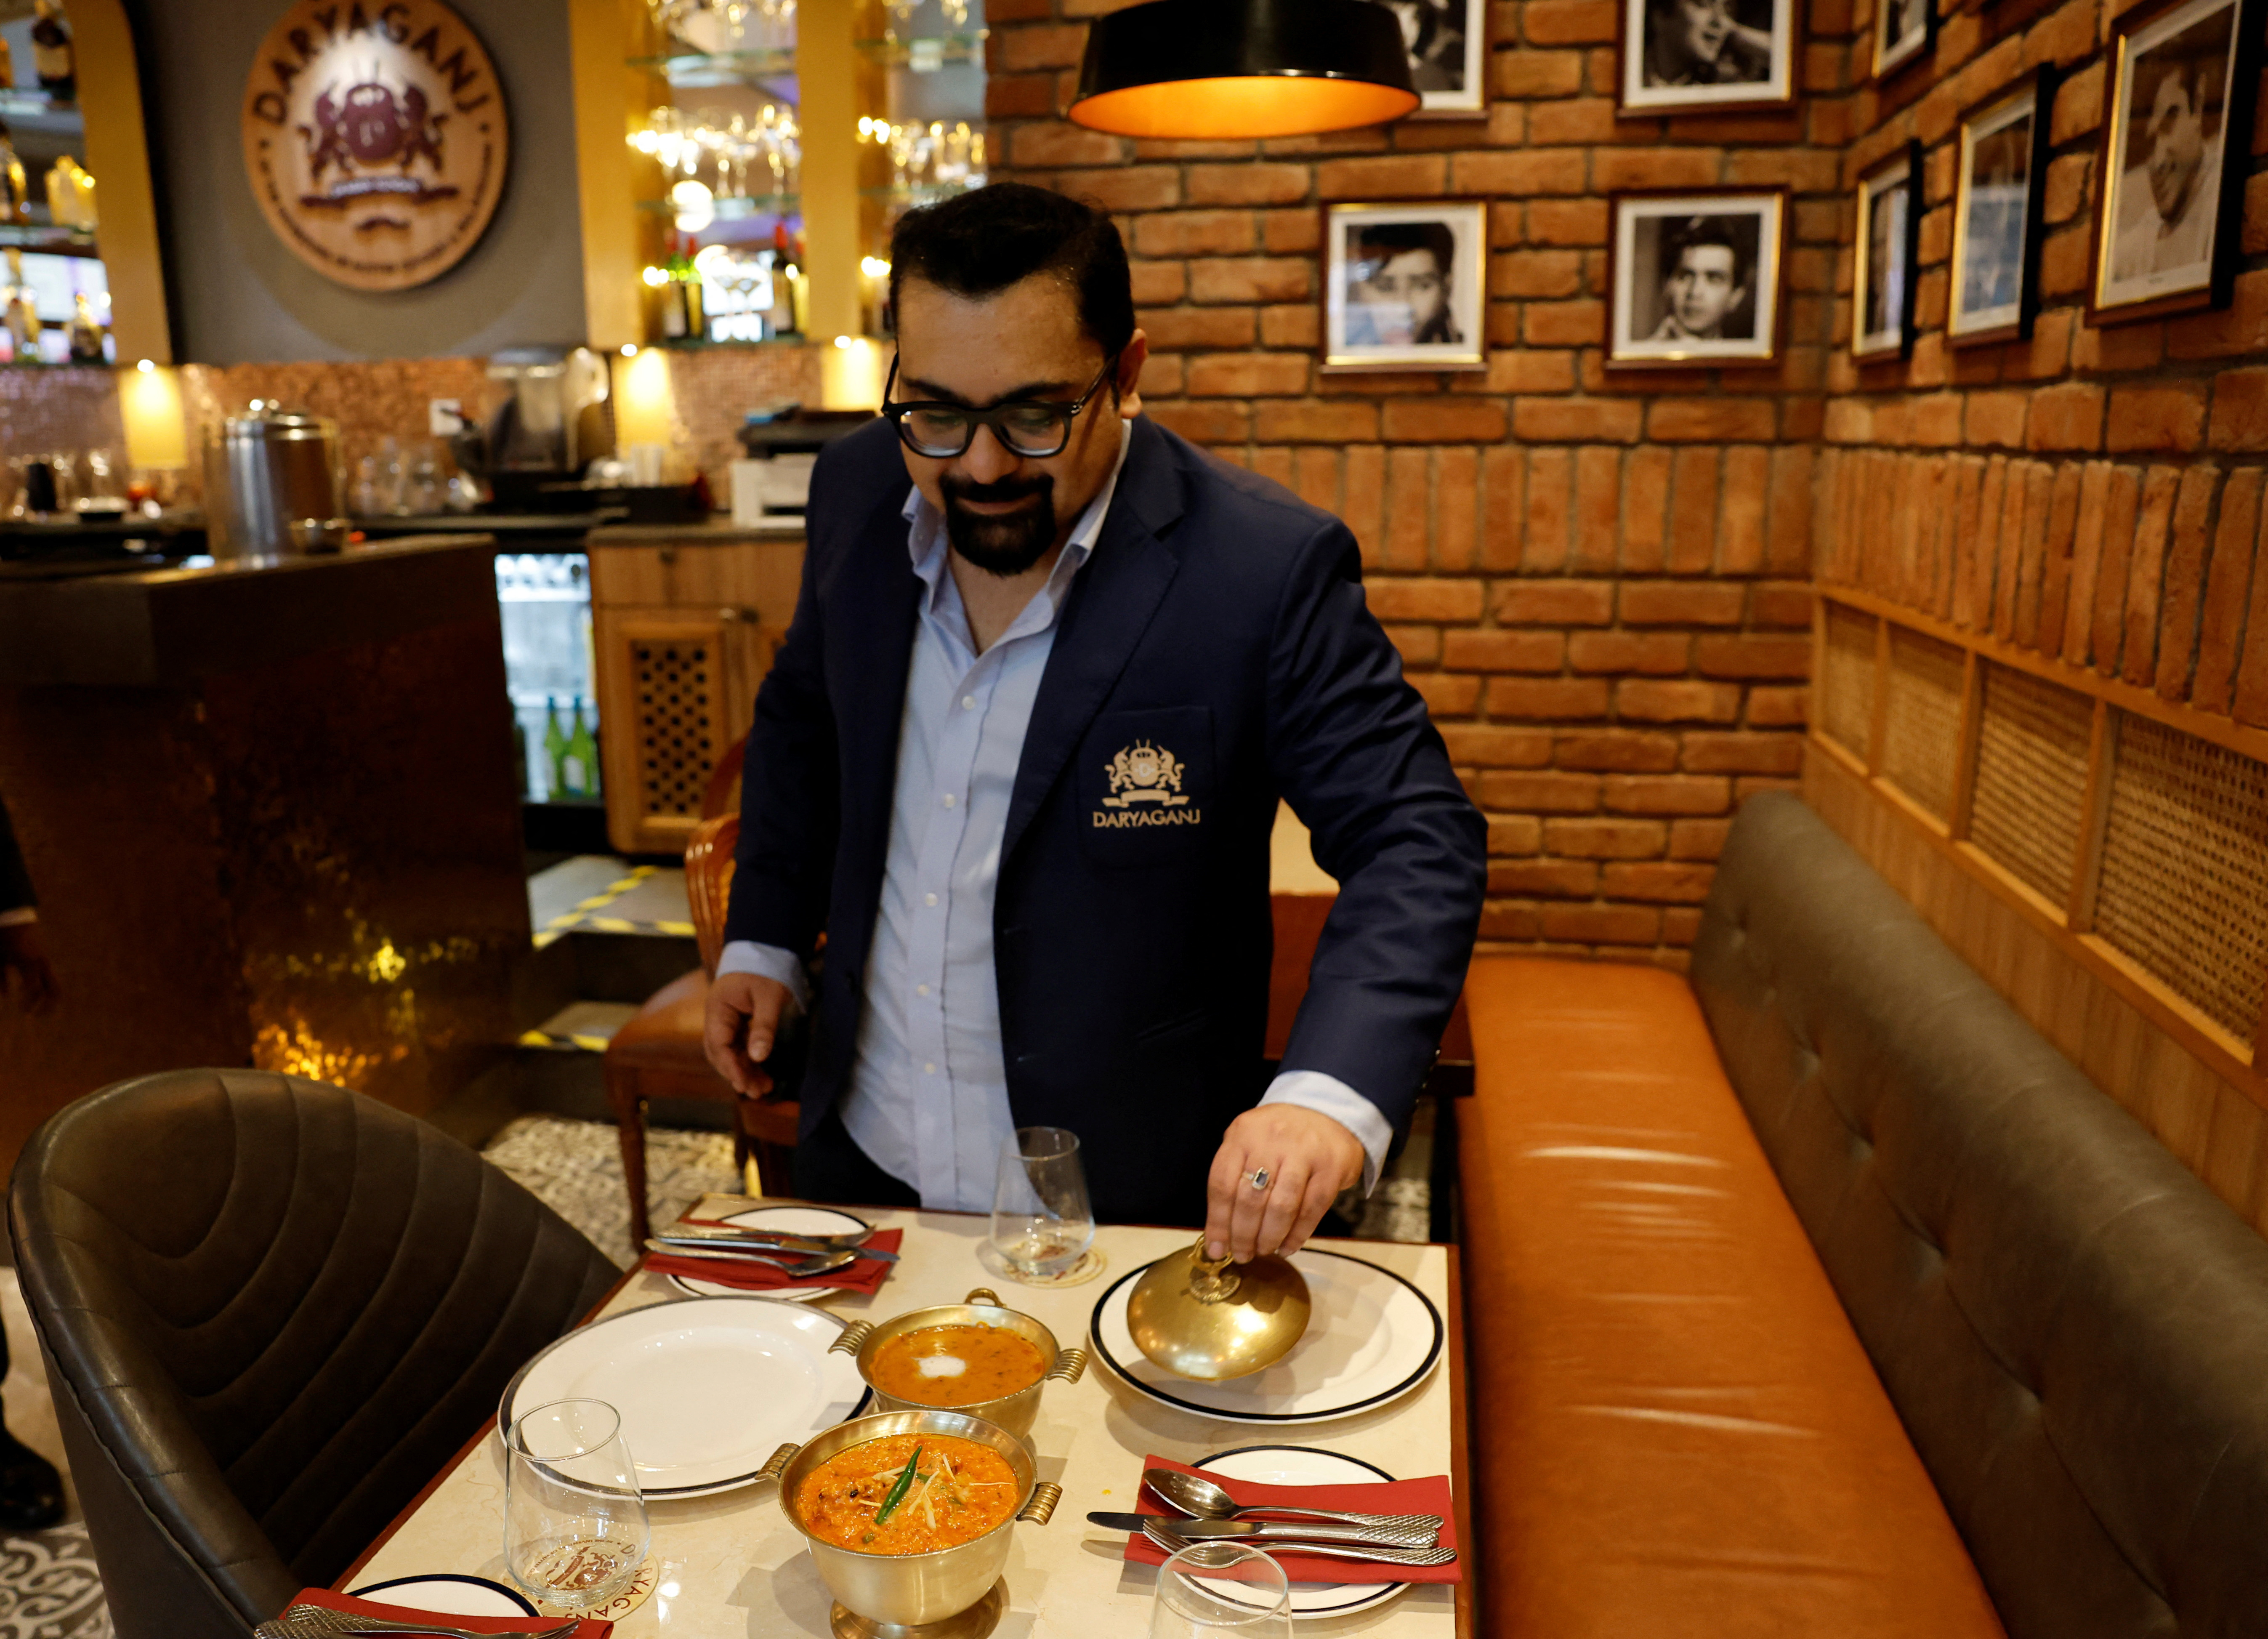 Amit Bagga, CEO of Daryaganj restaurant, shows a freshly prepared butter chicken dish and the lentil dish Dal Makhani, inside Daryaganj restaurant at a mall, in Noida